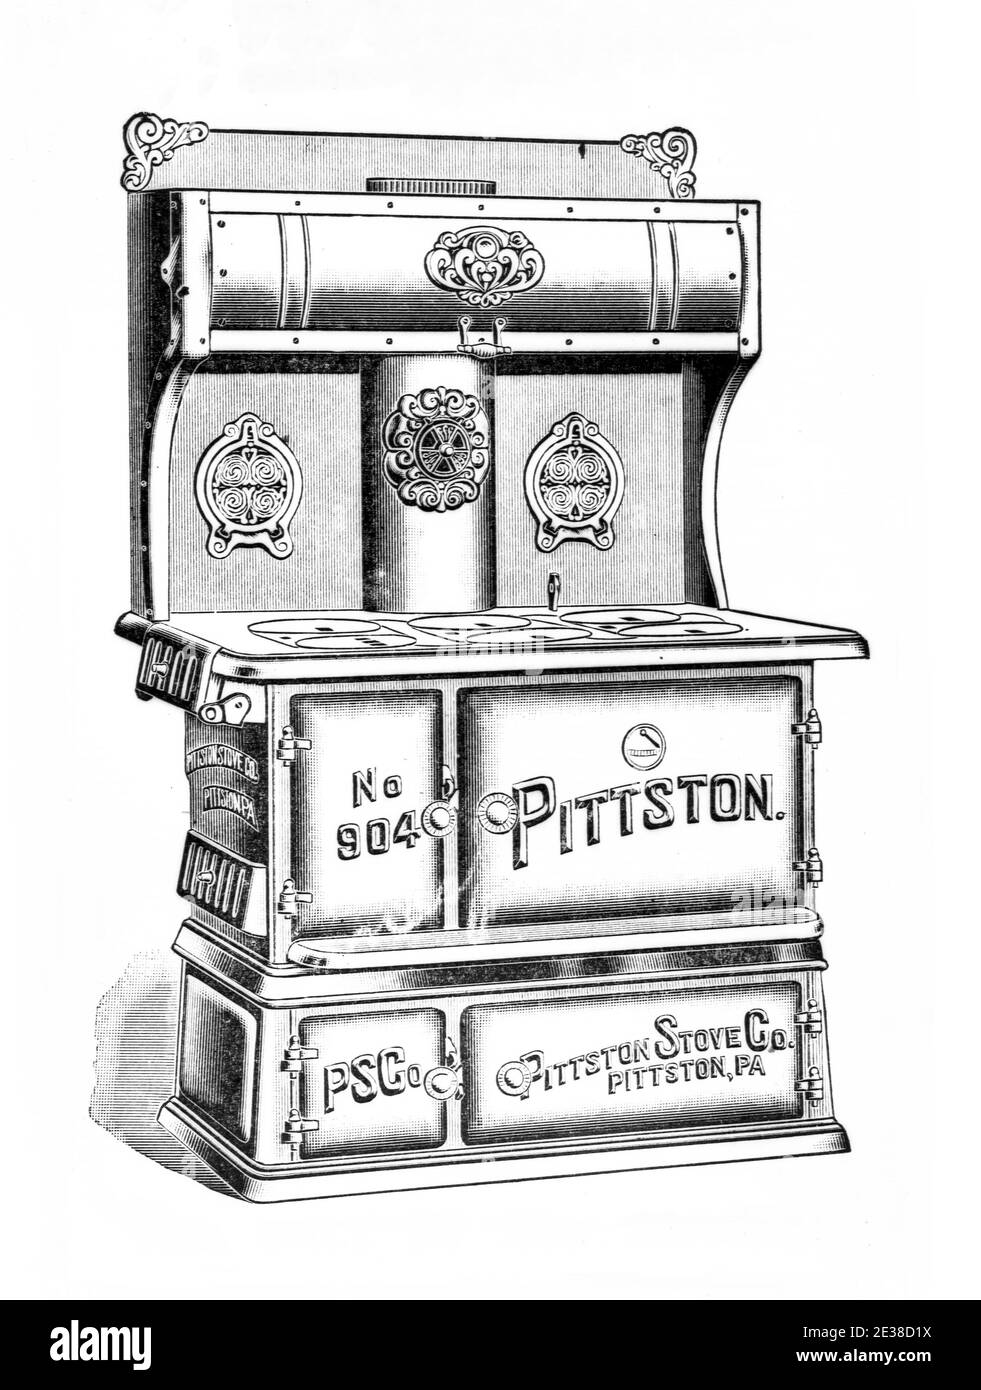 The Pittston Stove Company, was established in 1864. They manufactured coal and wood-burning stoves for heating and cooking. They were located in Pittston Pennsylvania,Luzerne County, USA Stock Photo